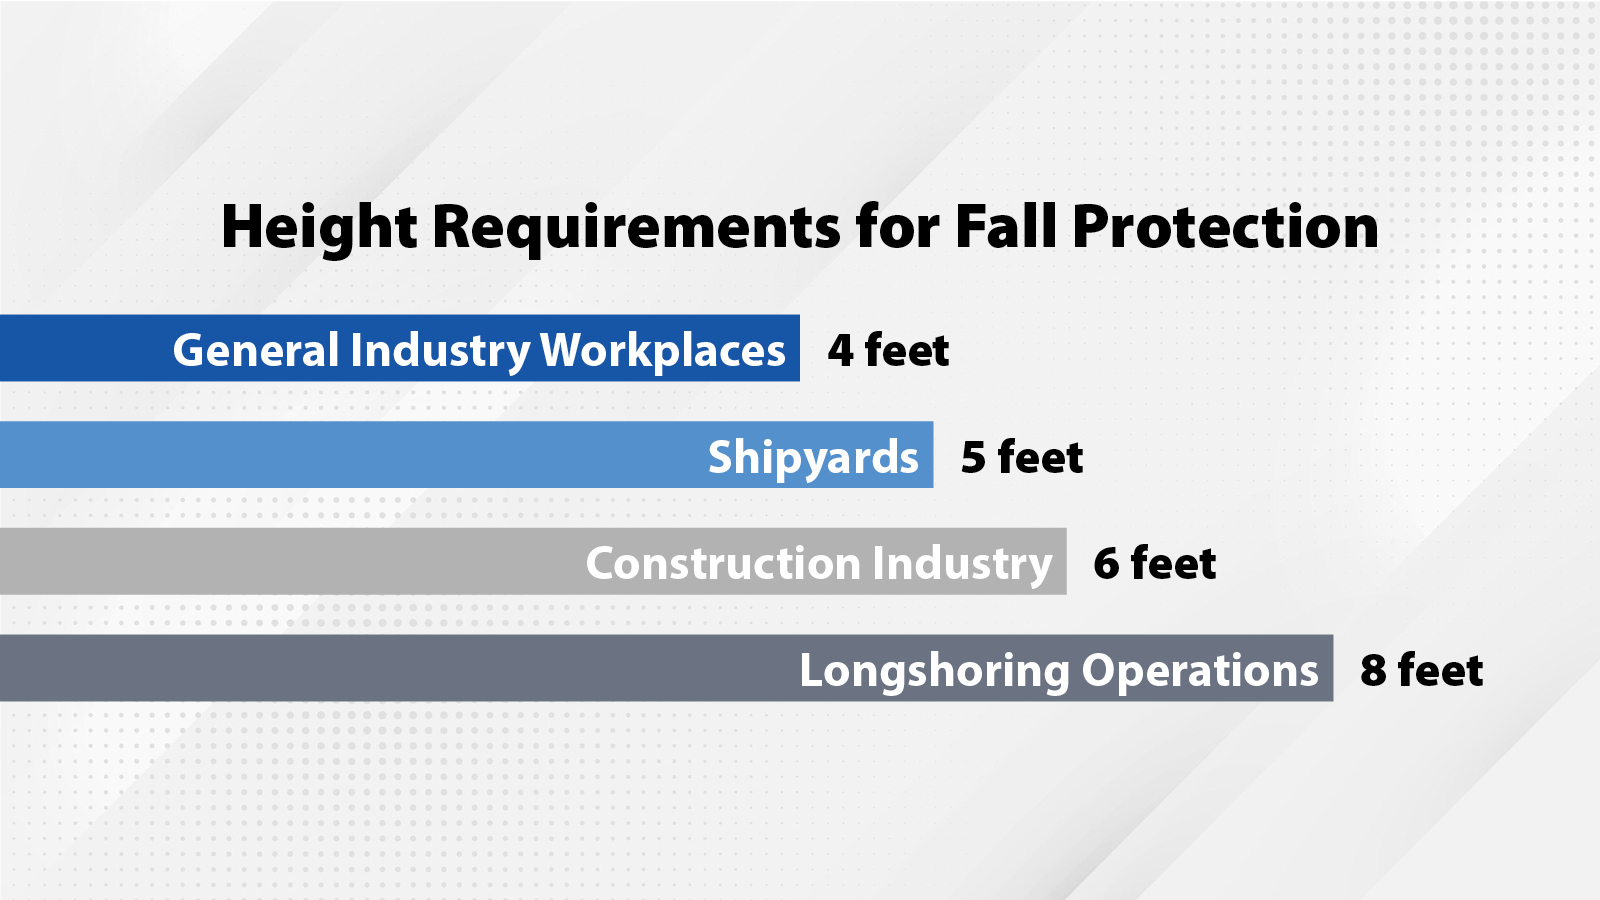 Height Requirements for Fall Protection